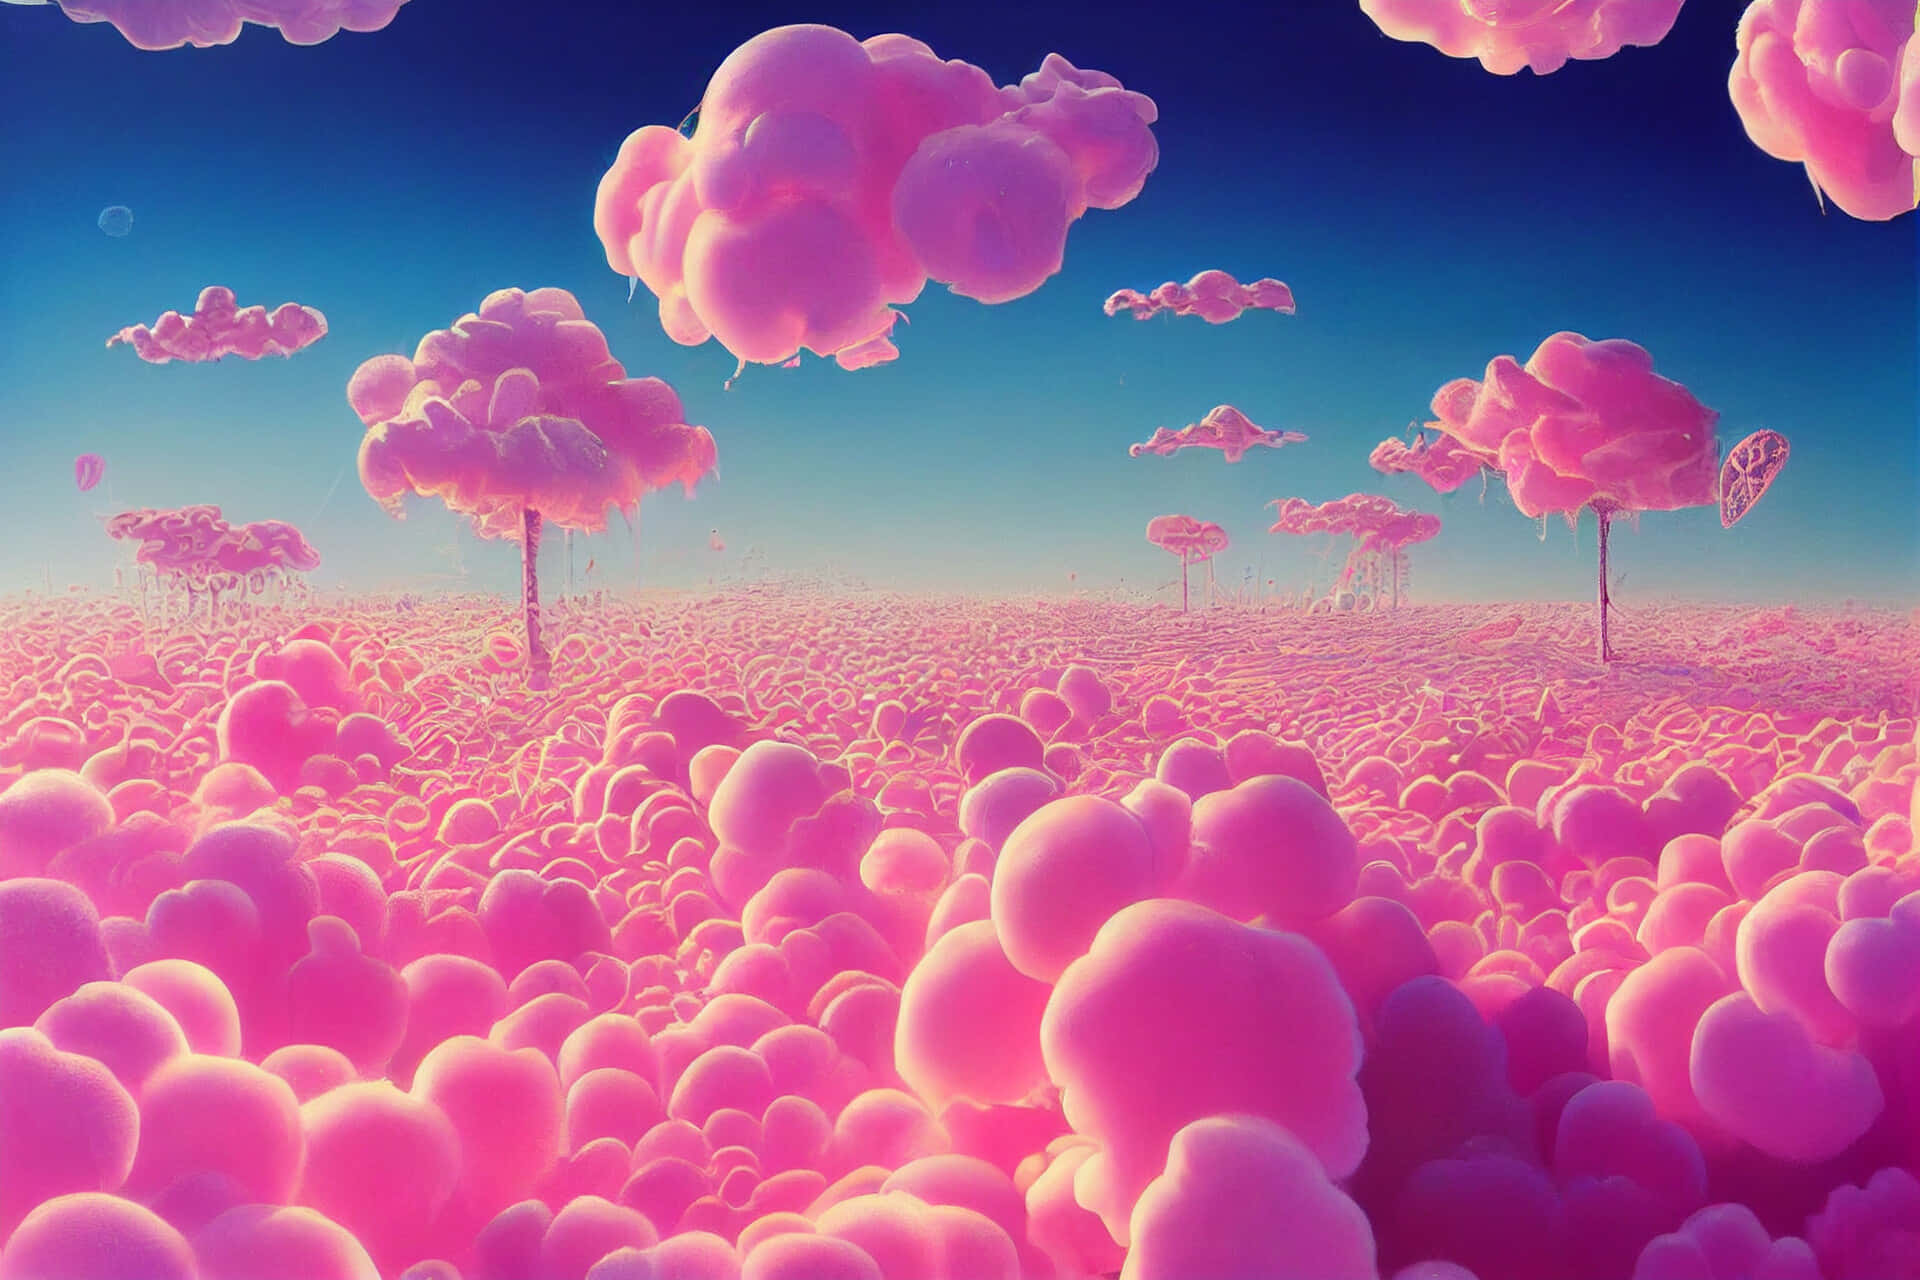 Cotton Candy Pink Trippy Aesthetic Clouds Wallpaper